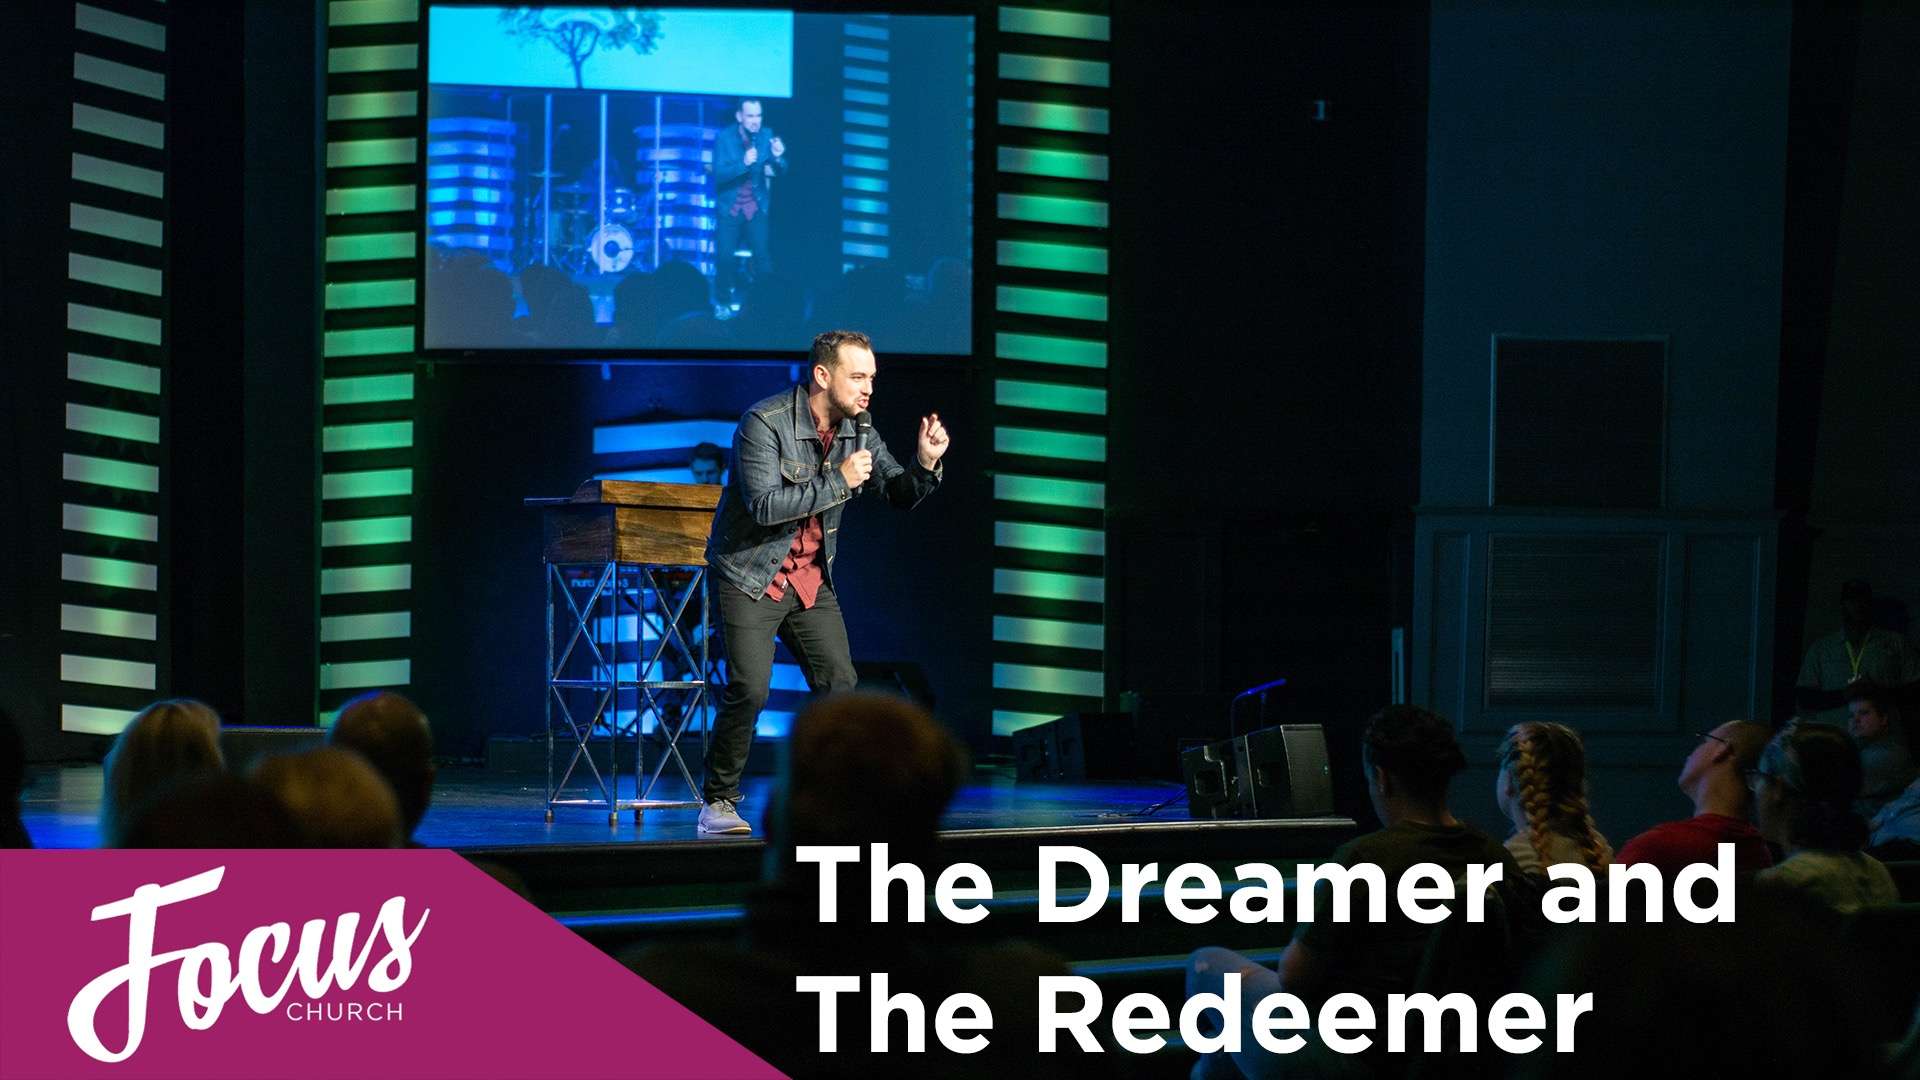 The Dreamer and The Redeemer